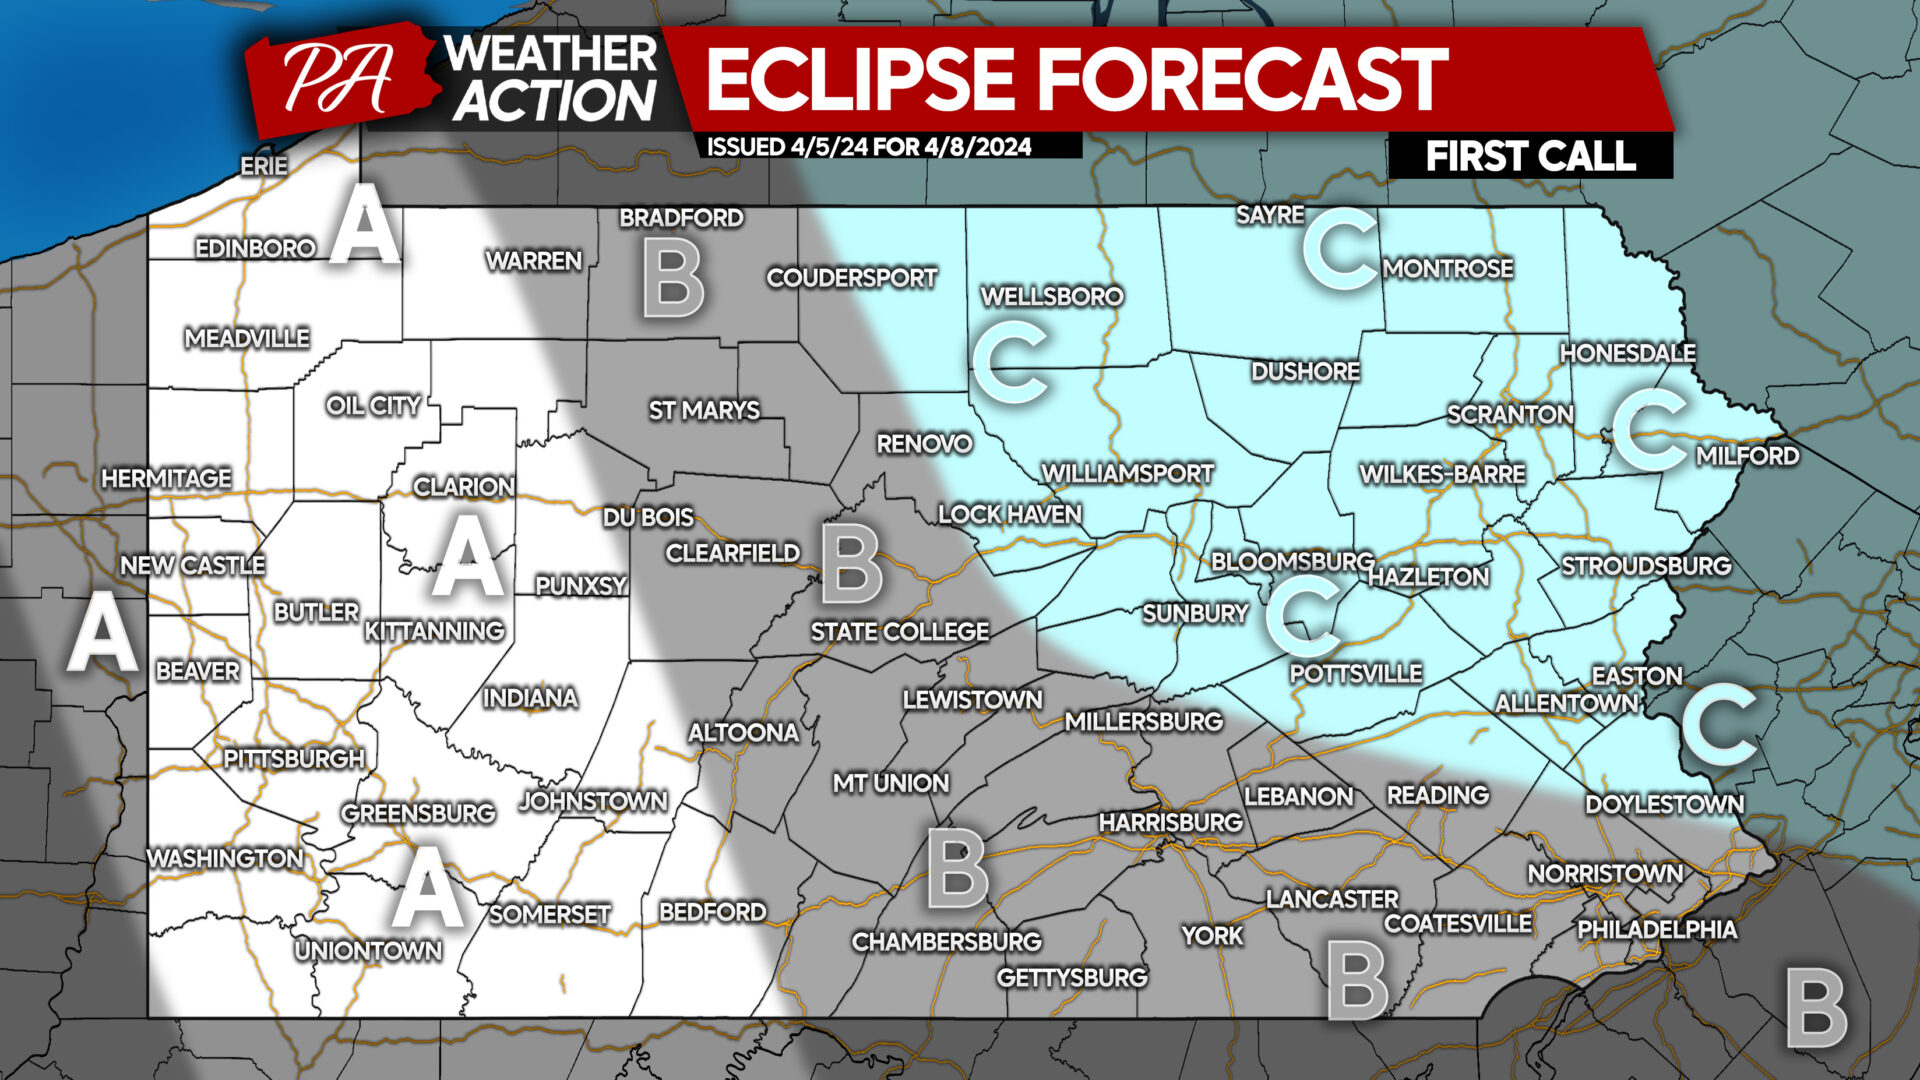 2024 Solar Eclipse Forecast for Pennsylvania: Unfavorable Conditions Likely In Path of Totality, What Does That Mean?